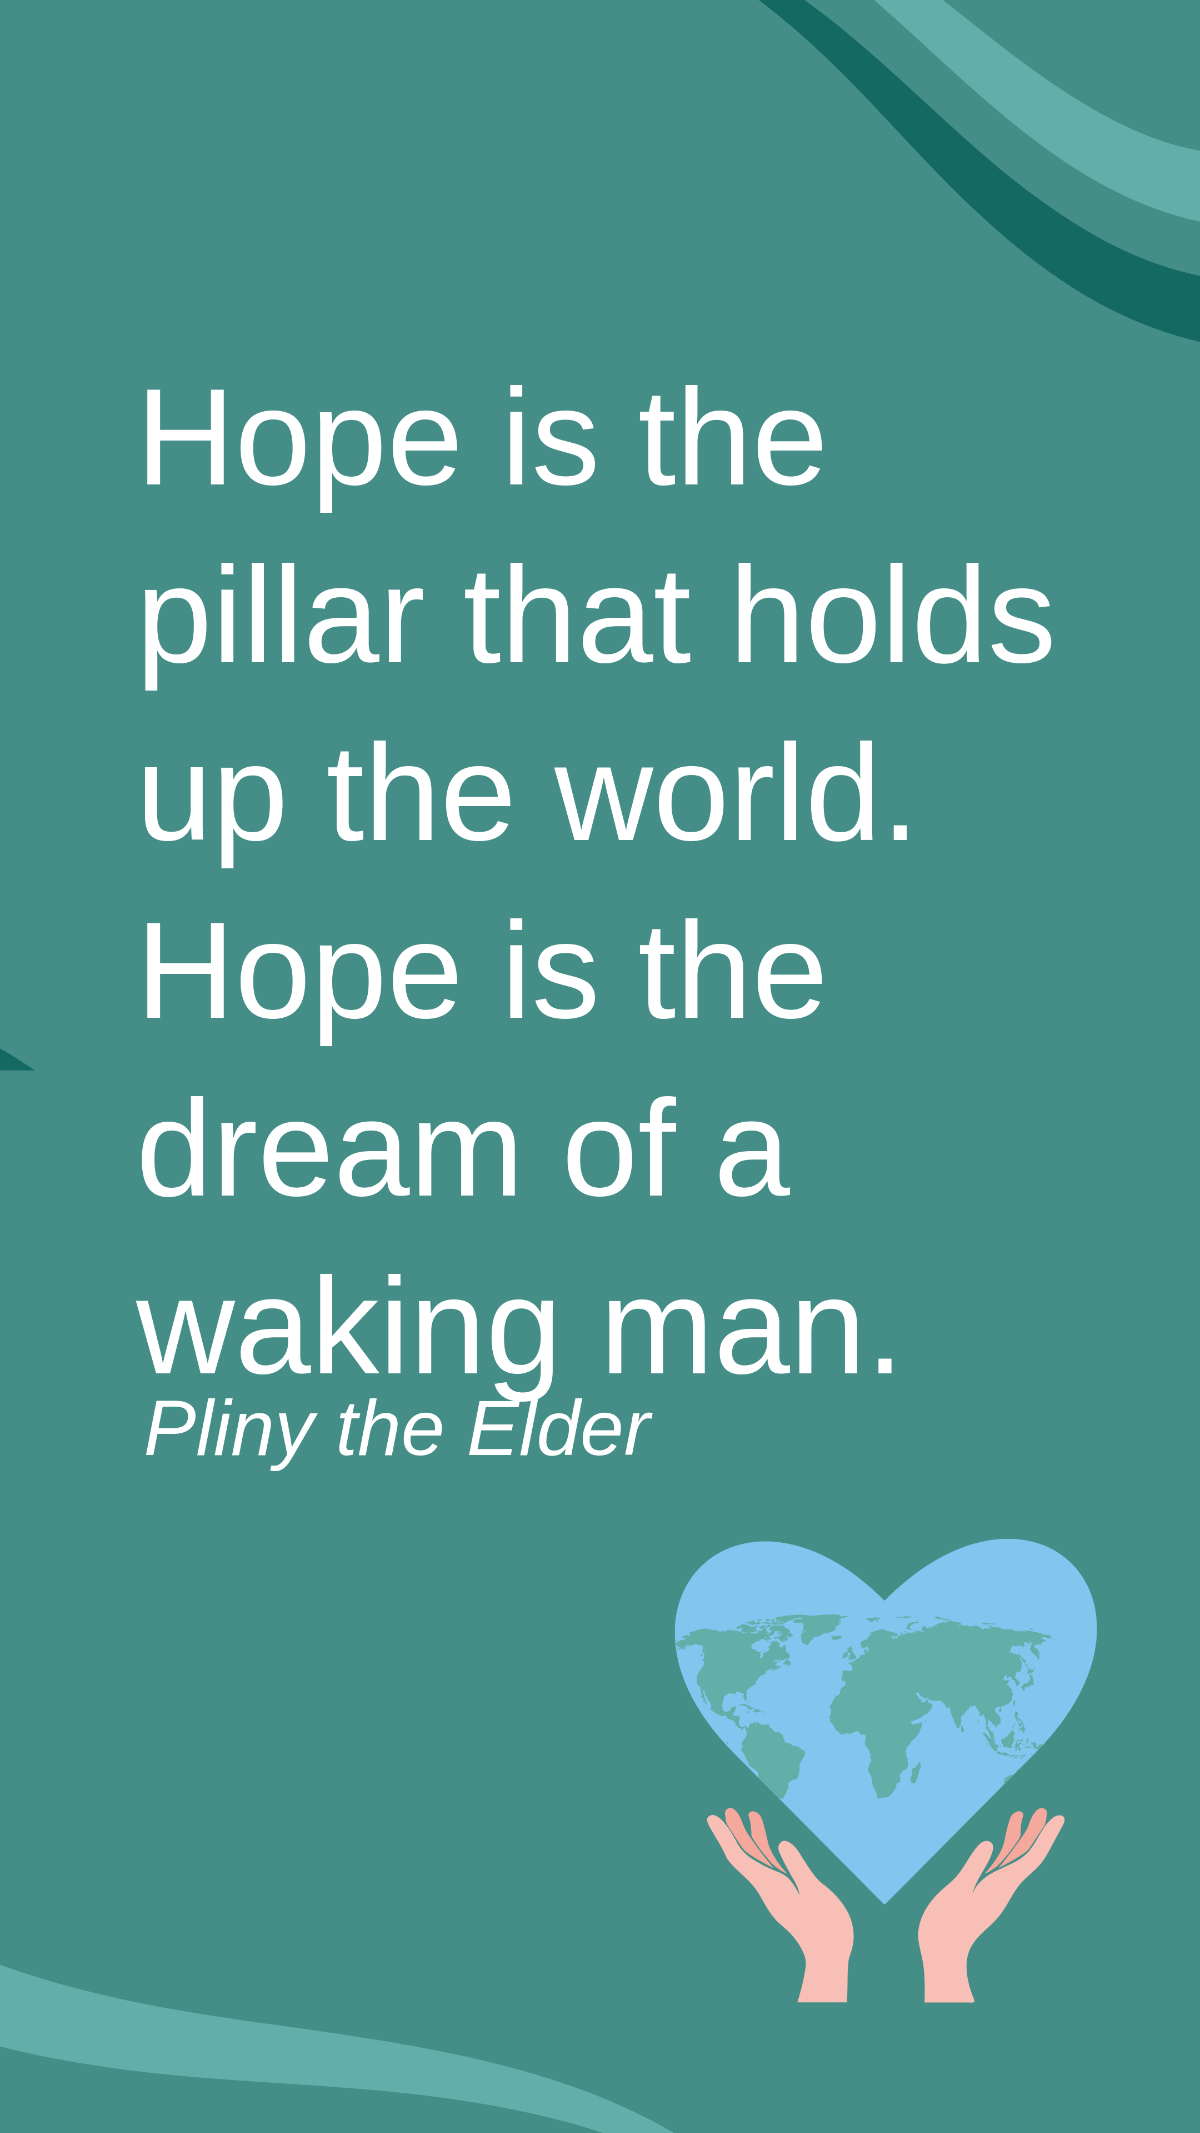 Free Pliny the Elder - Hope is the pillar that holds up the world. Hope is the dream of a waking man. Template